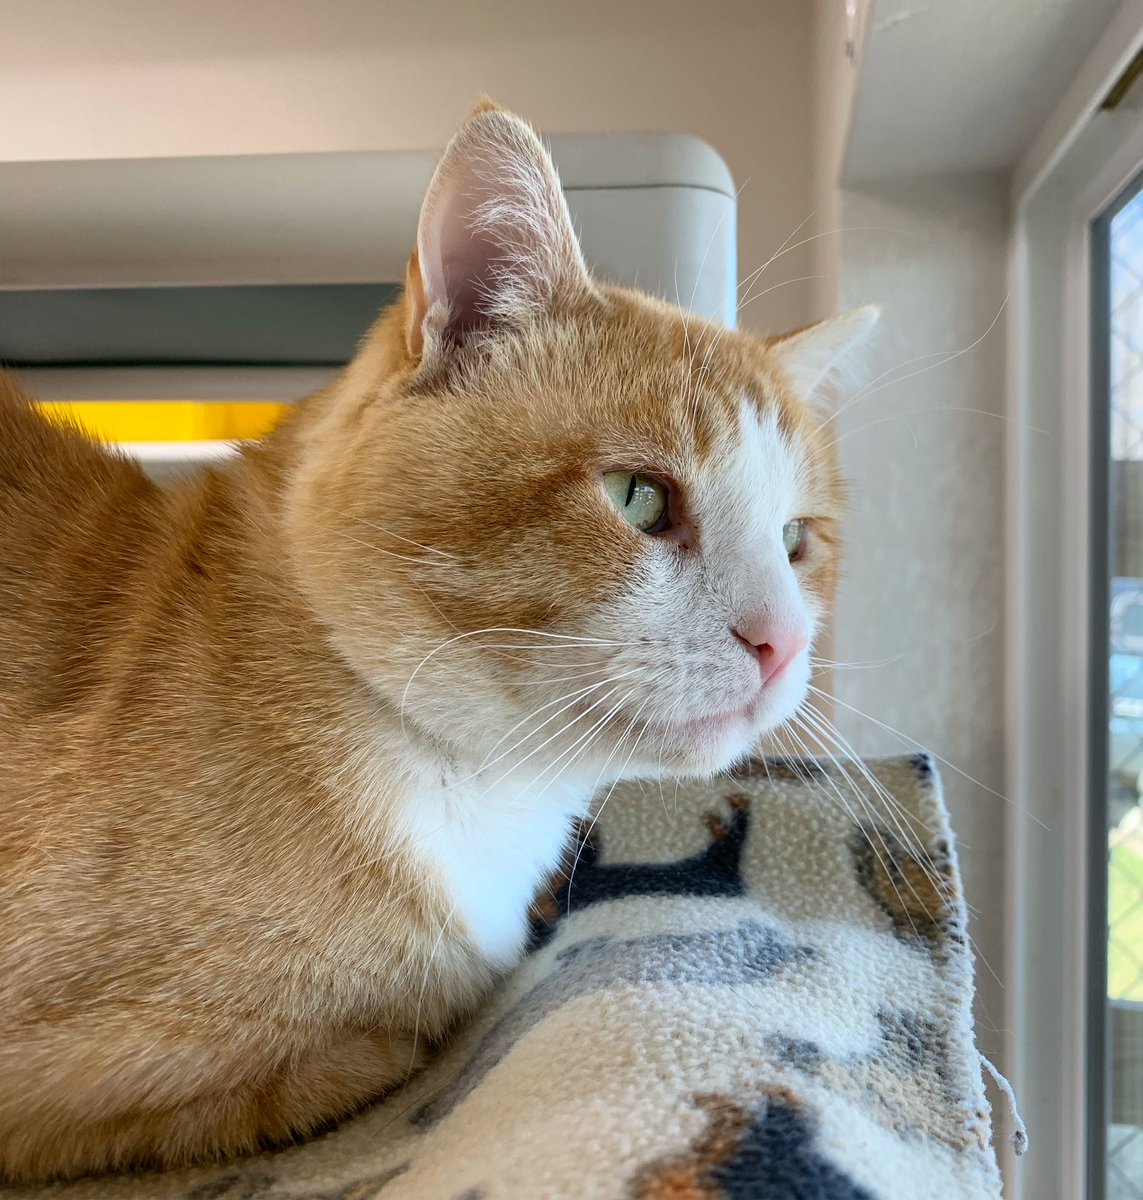 Does your window have what it takes to be Monroe-worthy? One way to find out!

cdhs.net #caturday #sheltercat #adoptdontshop #cats #catsoftwitter